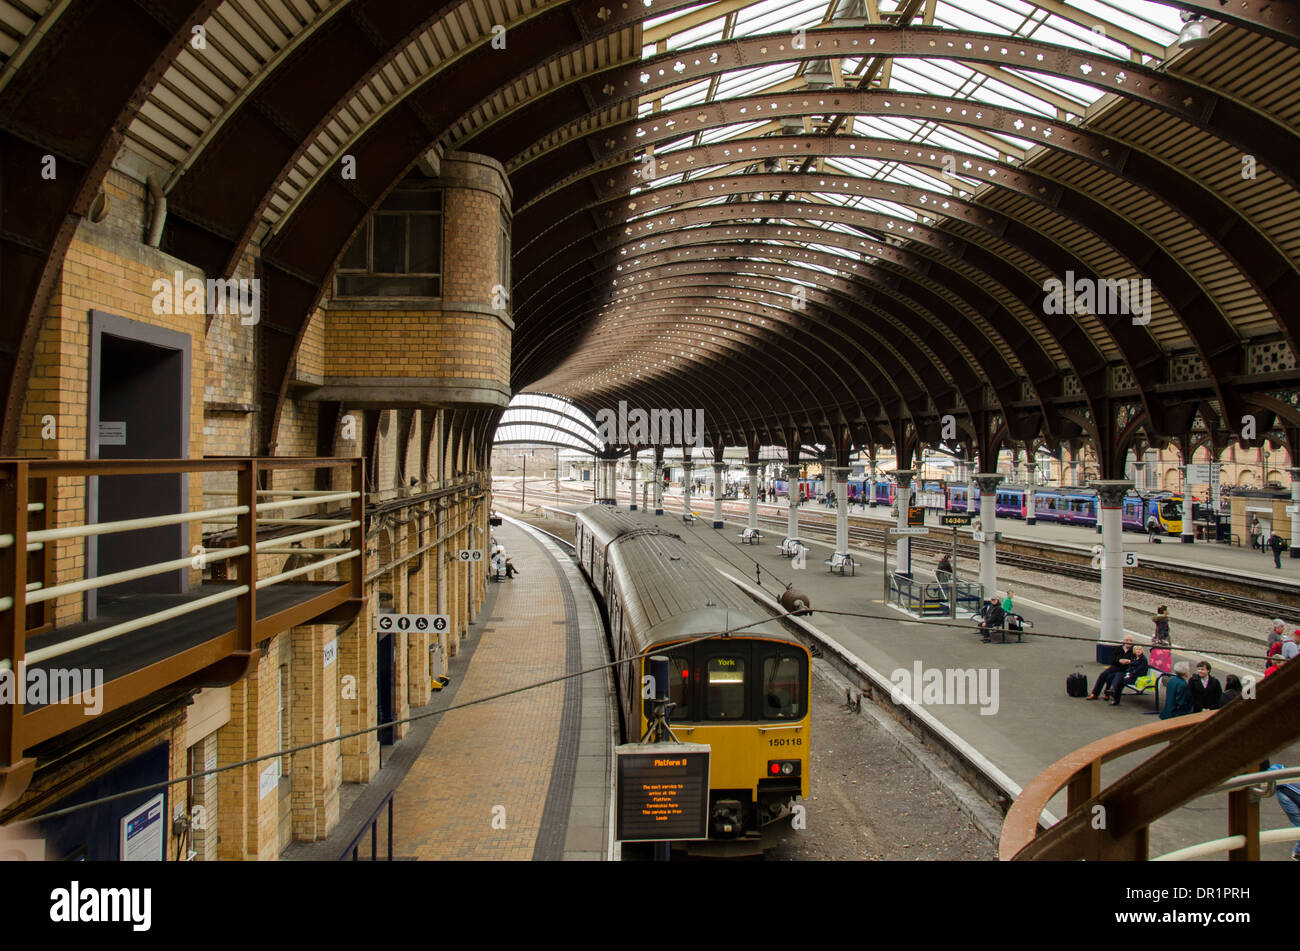 Interior view of trainshed with iron & glass roof, stationary trains & people waiting on platfom - York Railway Station, North Yorkshire, England, UK. Stock Photo